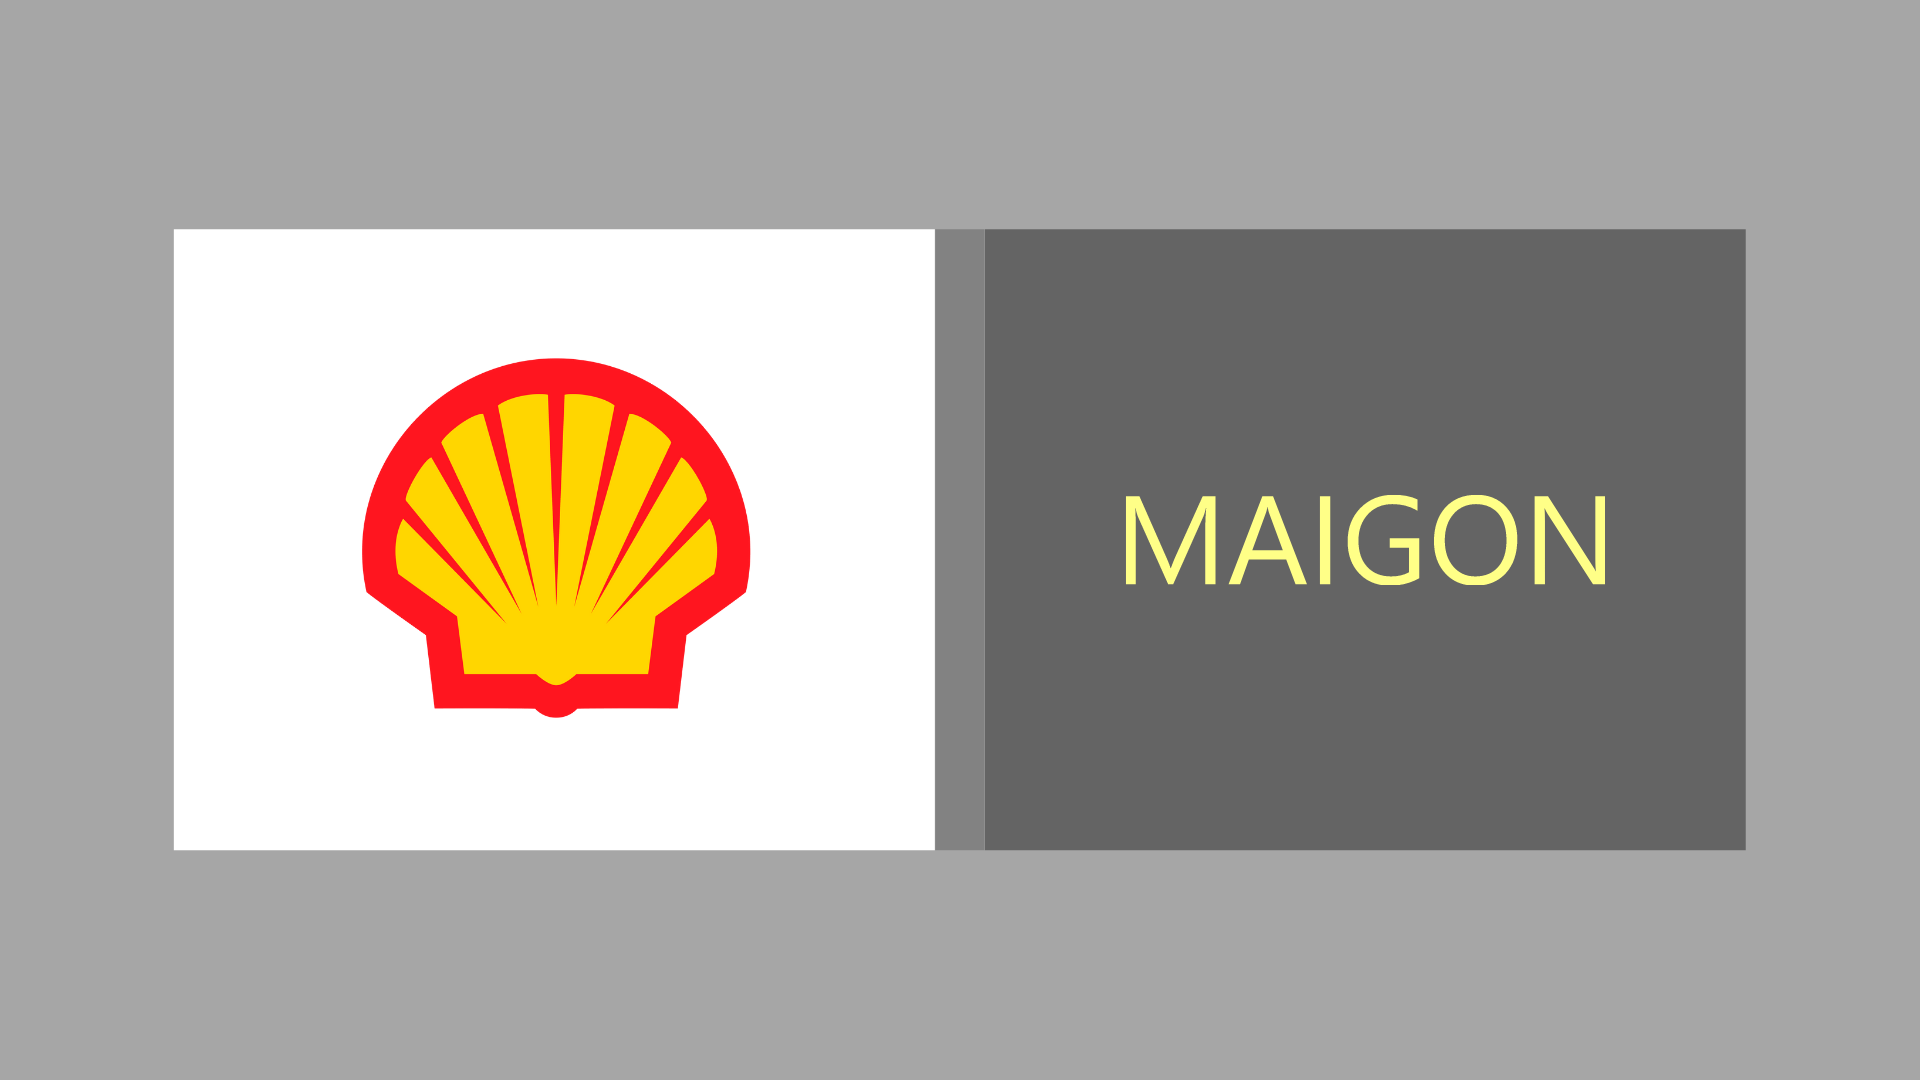 Maigon appointed gamechanger by Shell